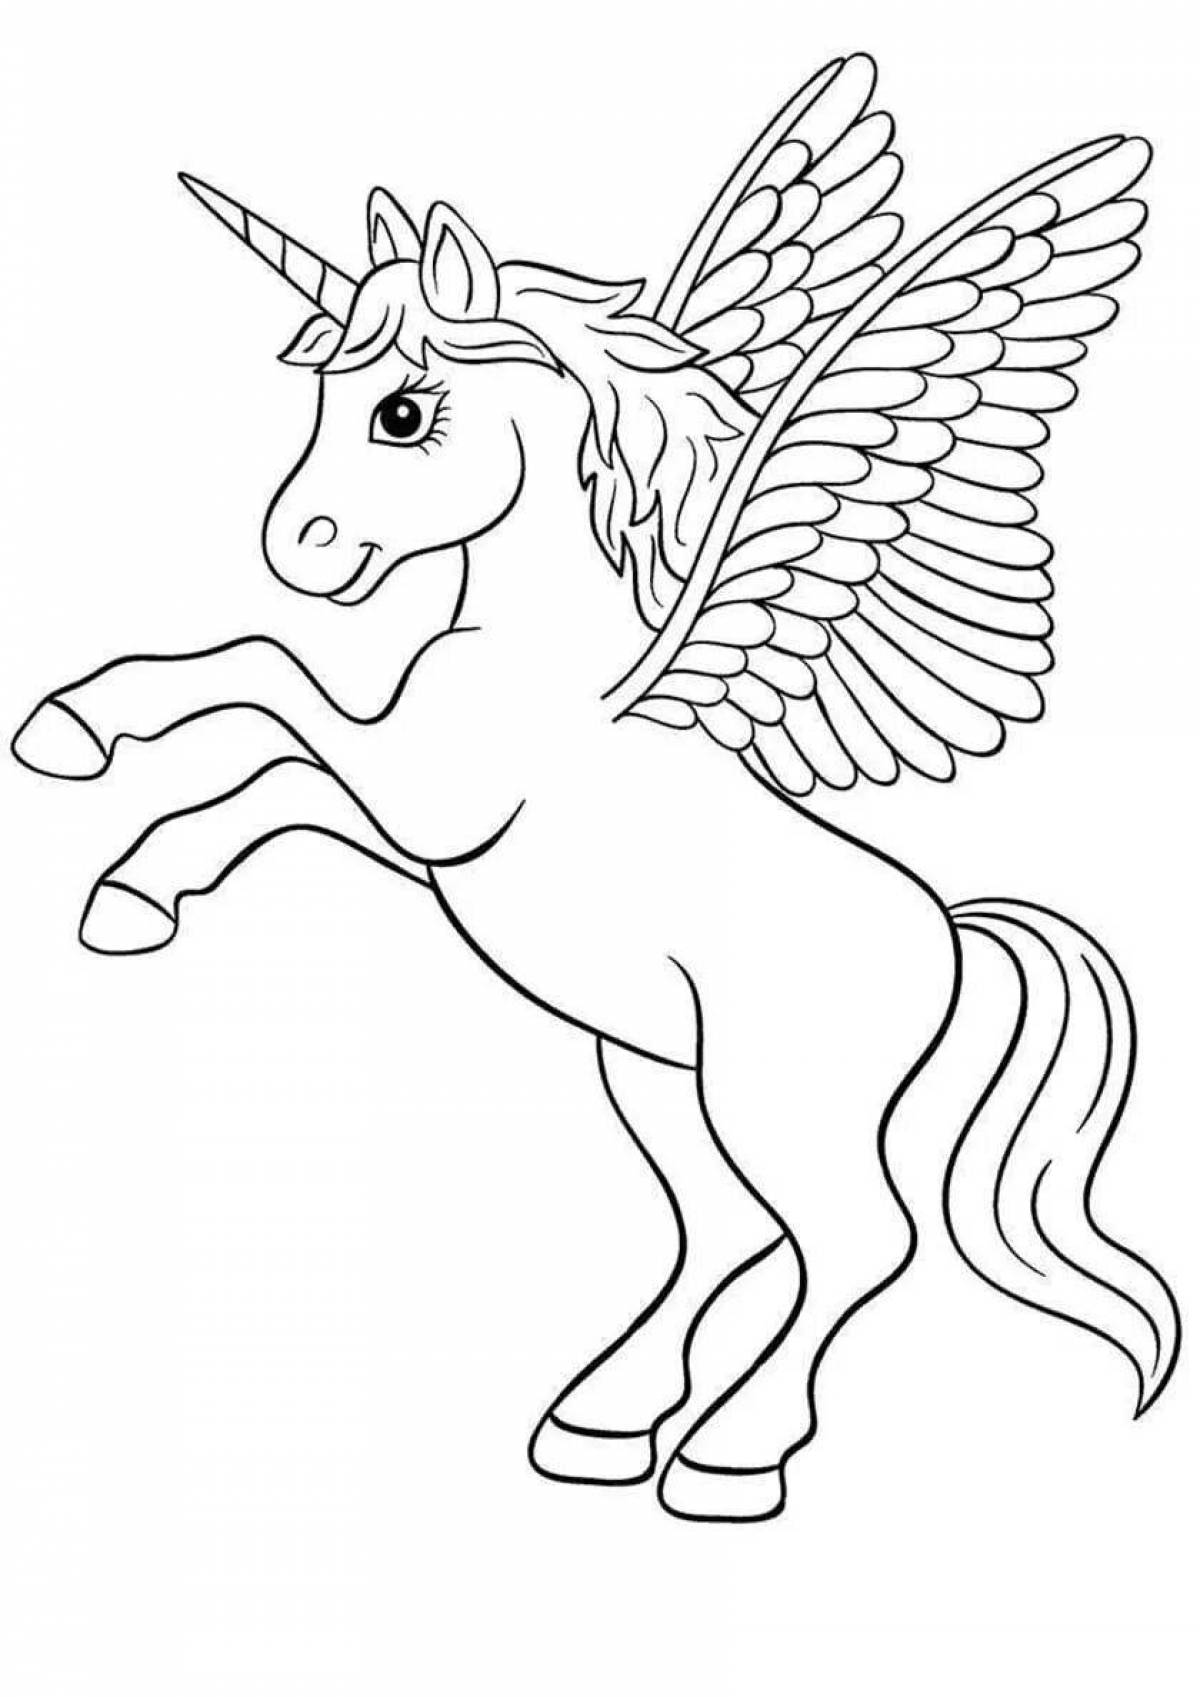 A wonderful coloring picture of a unicorn